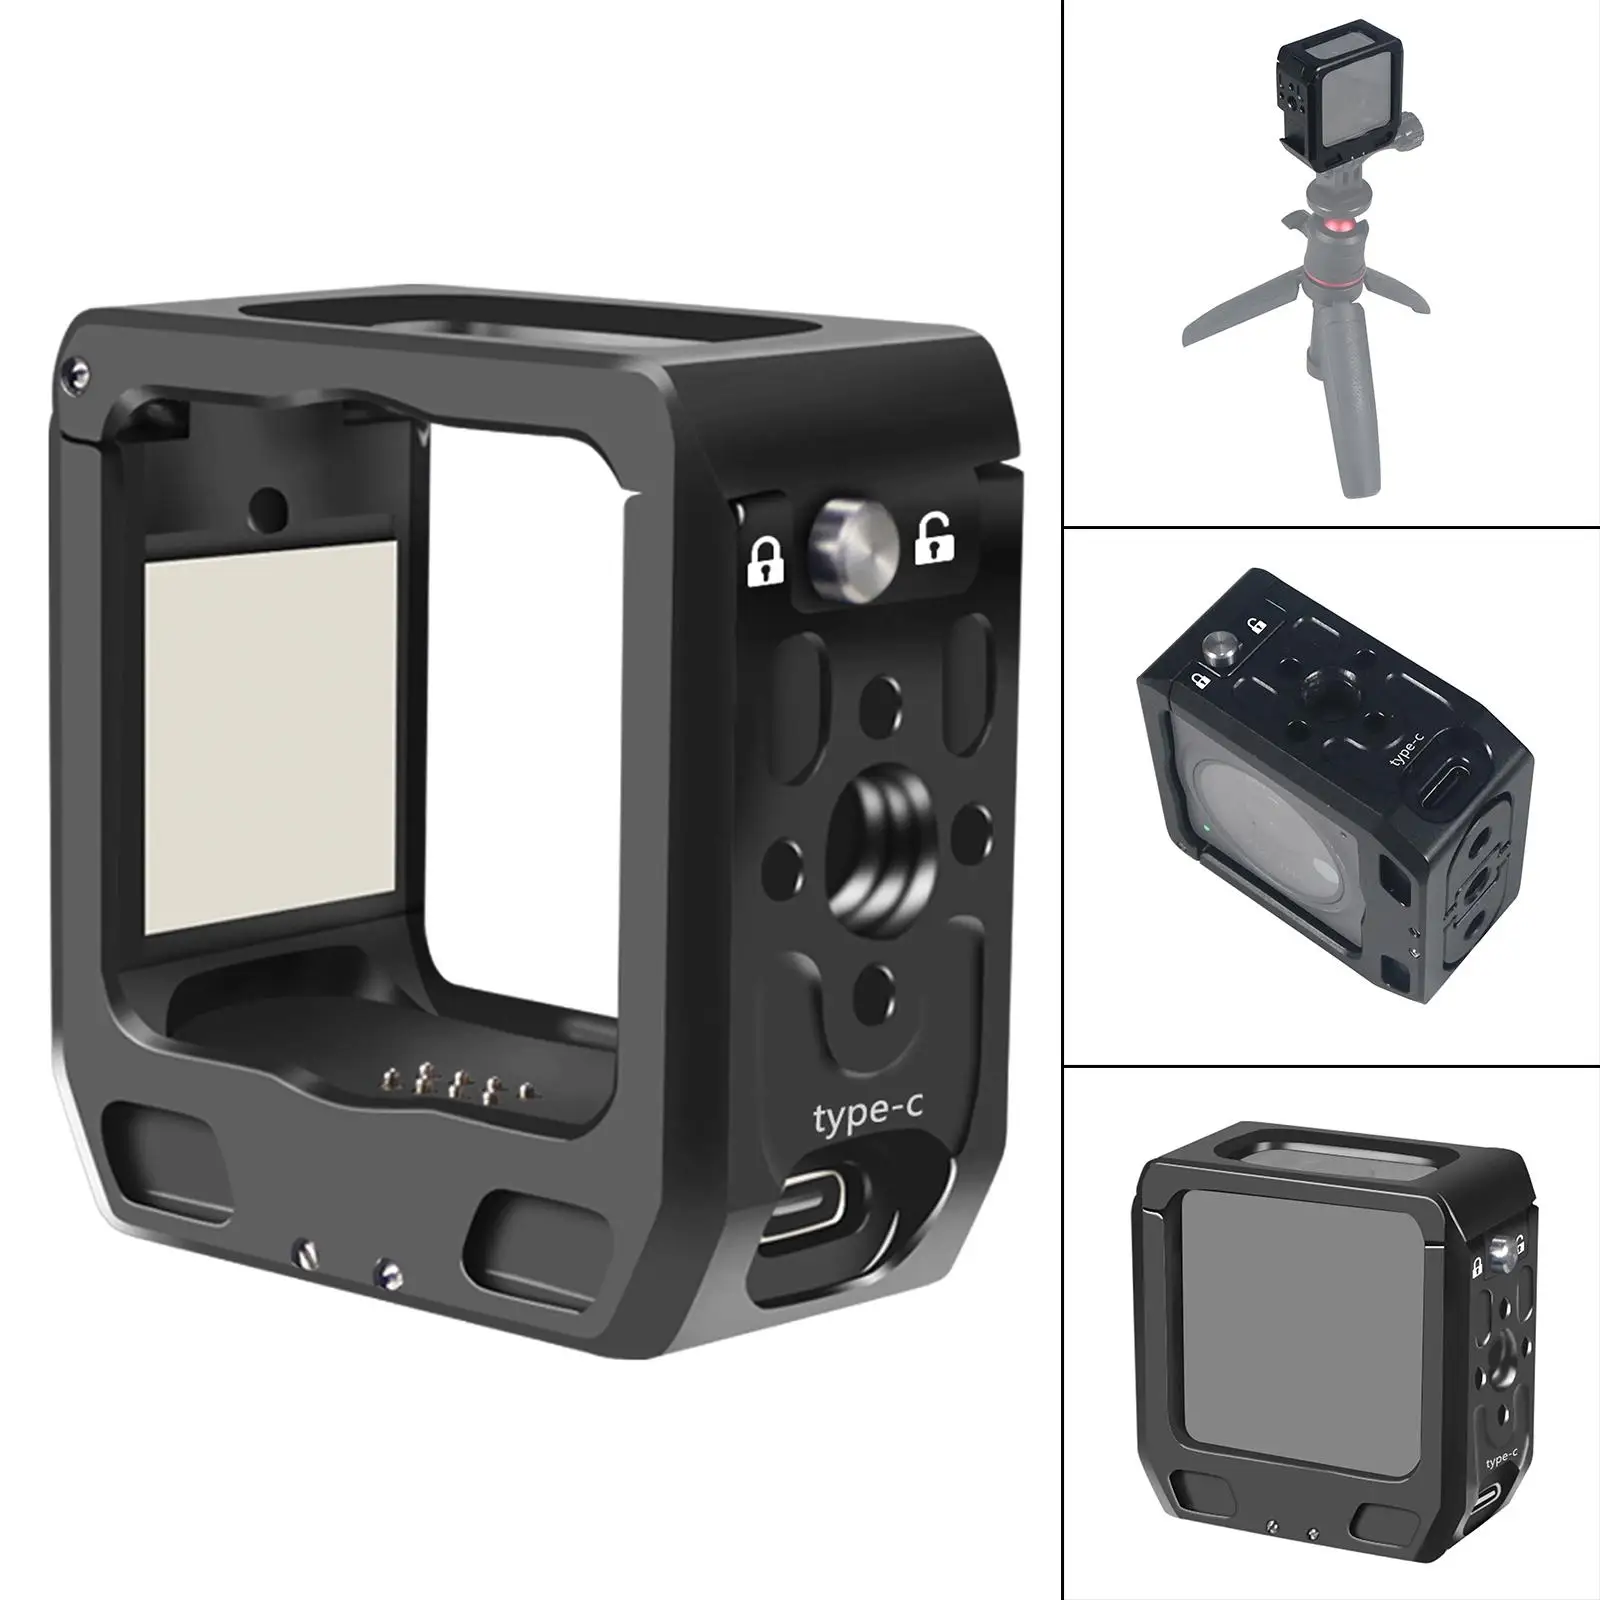 Aluminum Alloy Black Camera Rabbit Cage Frame Shell Housing Case for   Replacement Parts